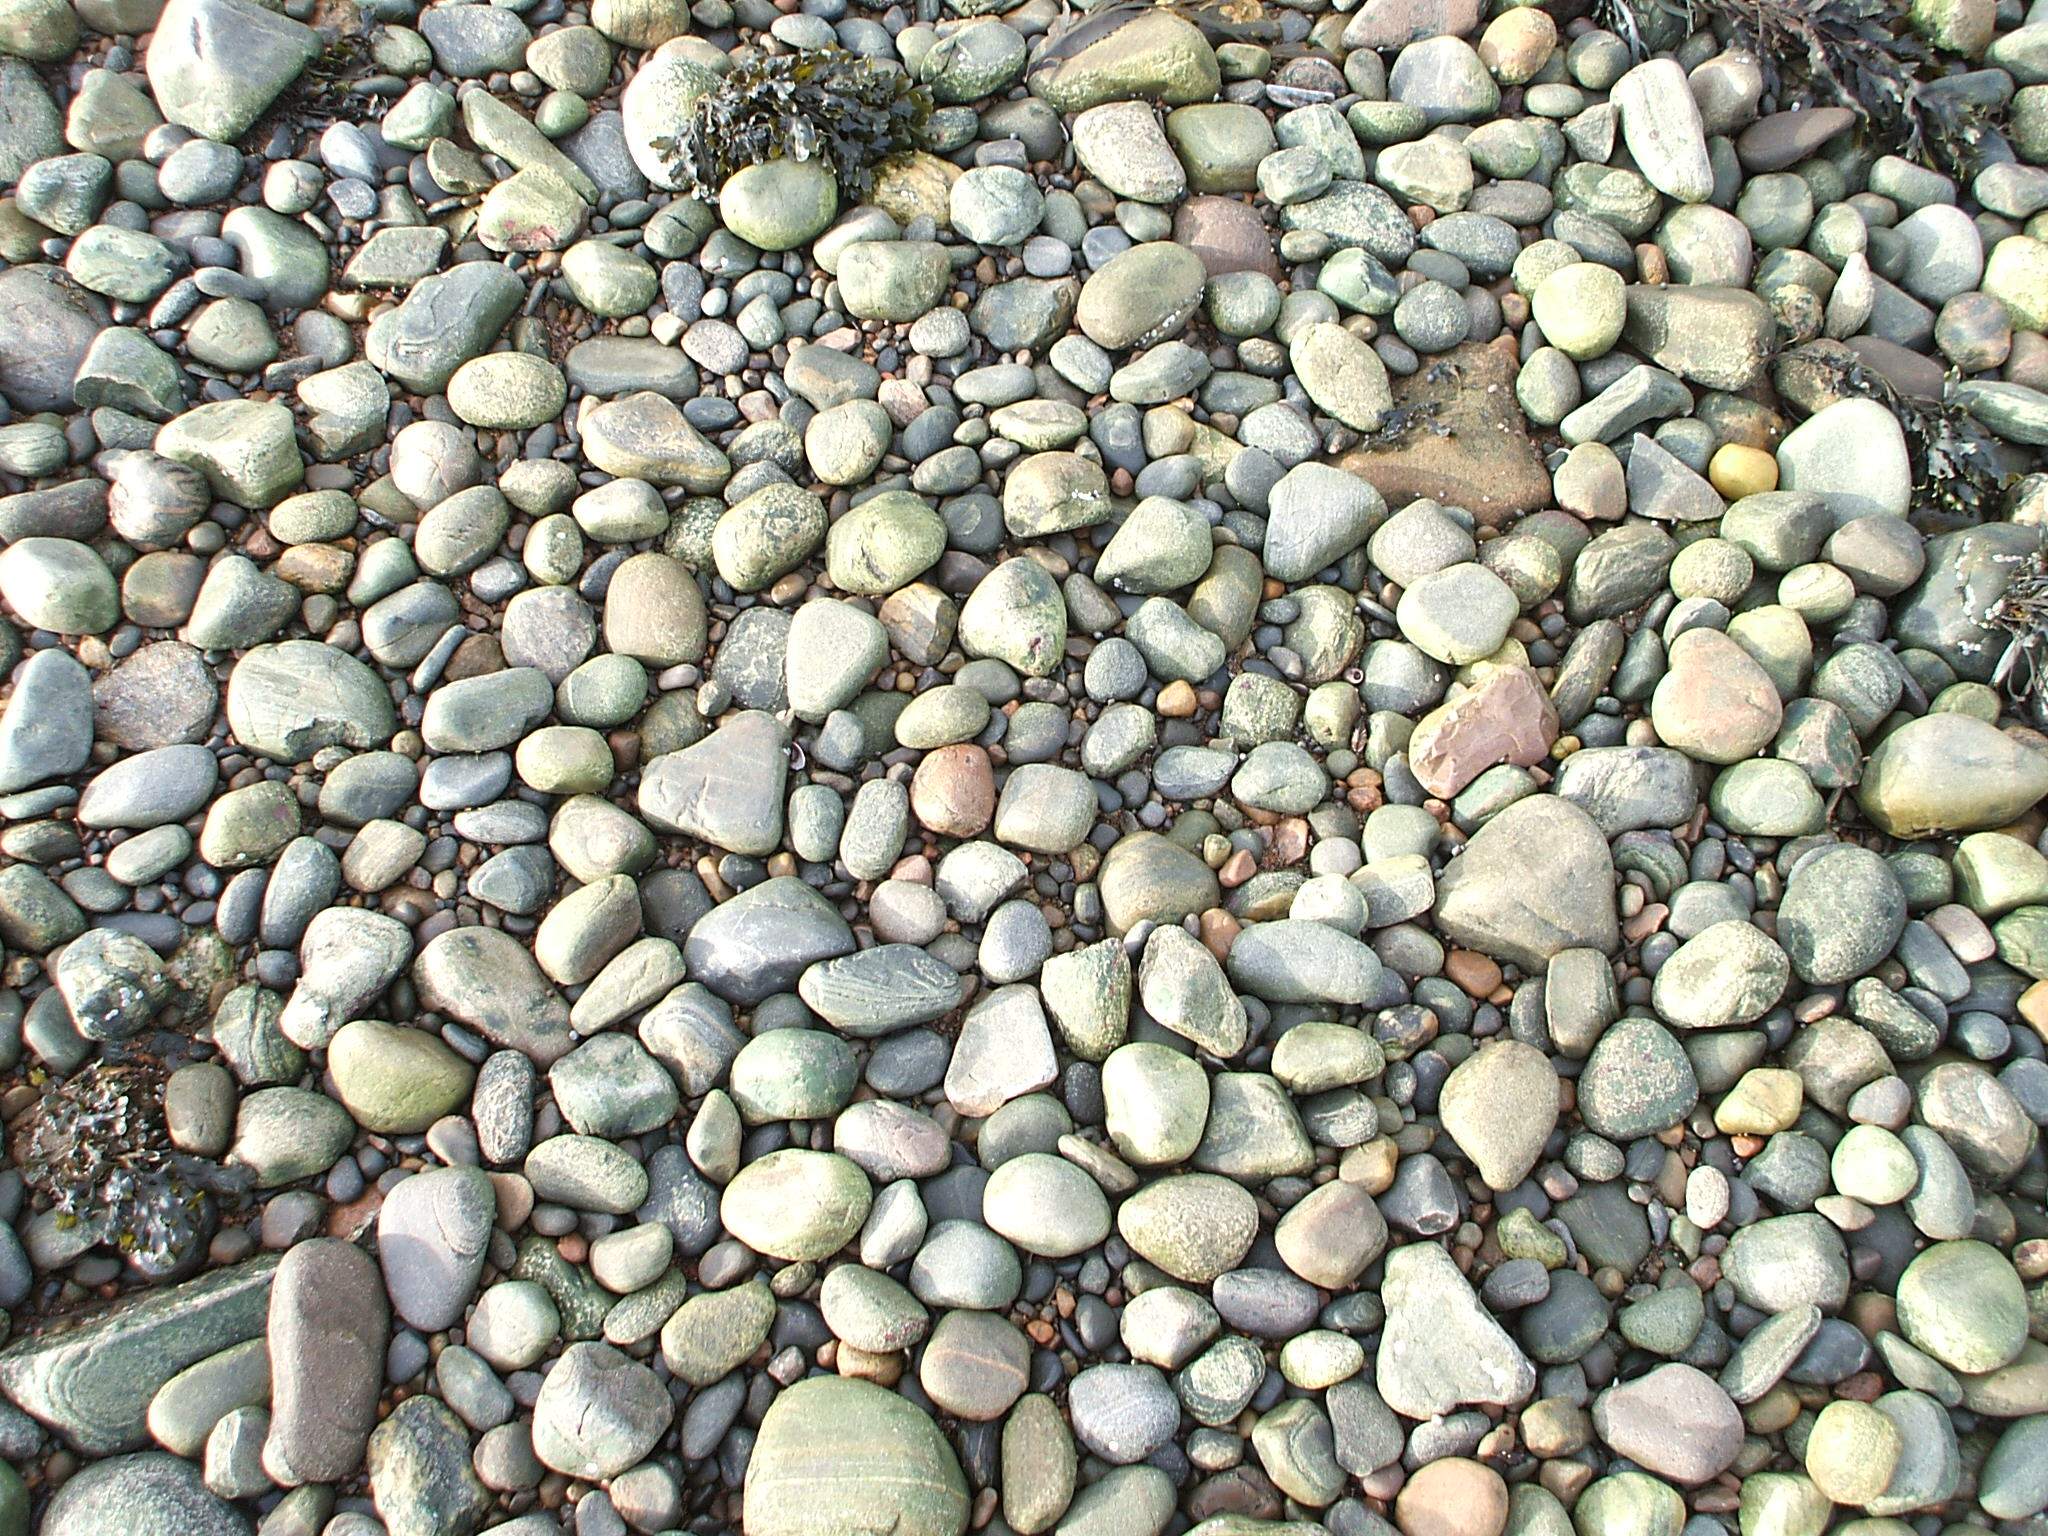 rocks and plants in the dirt next to water